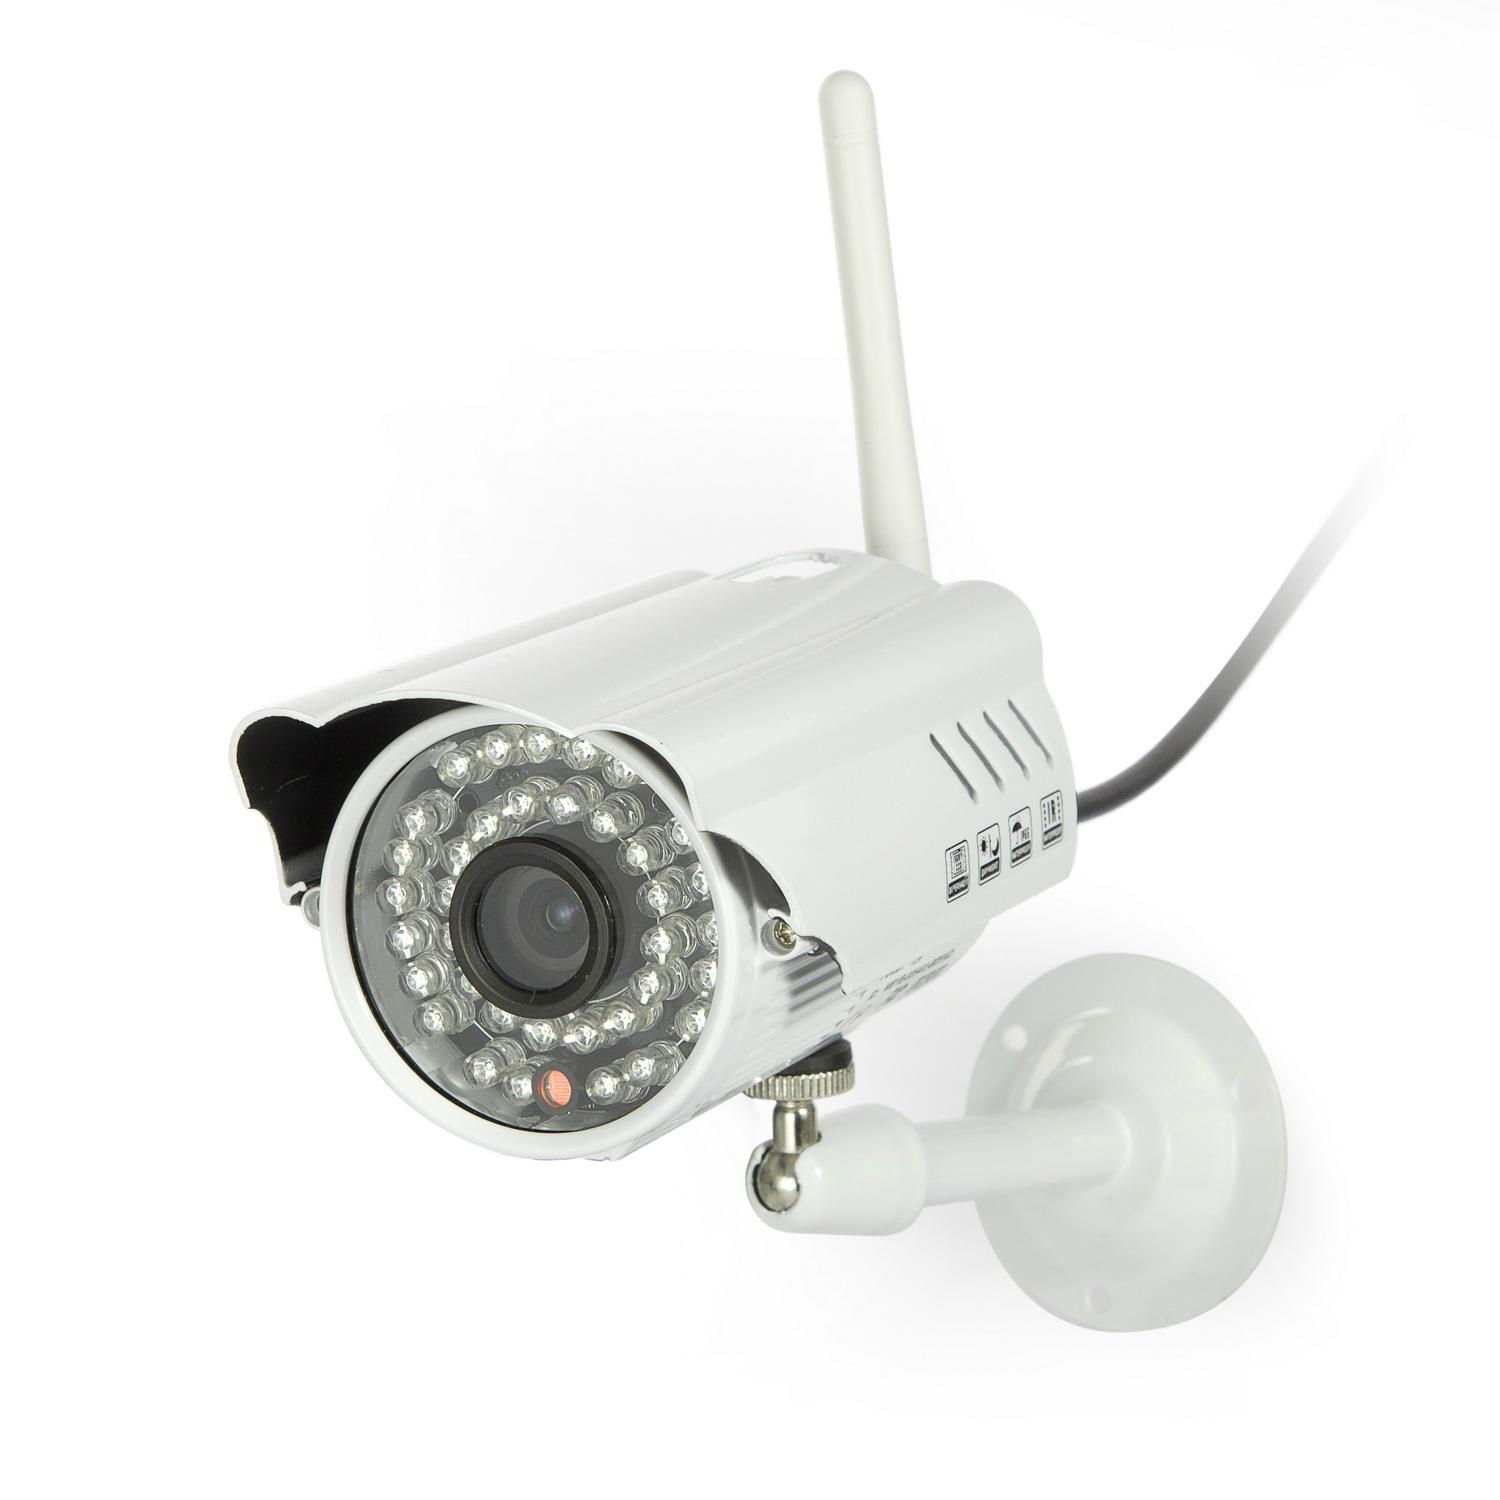 Alytimes Aly009 ir cut sd card outdoor hd security camera ip 5